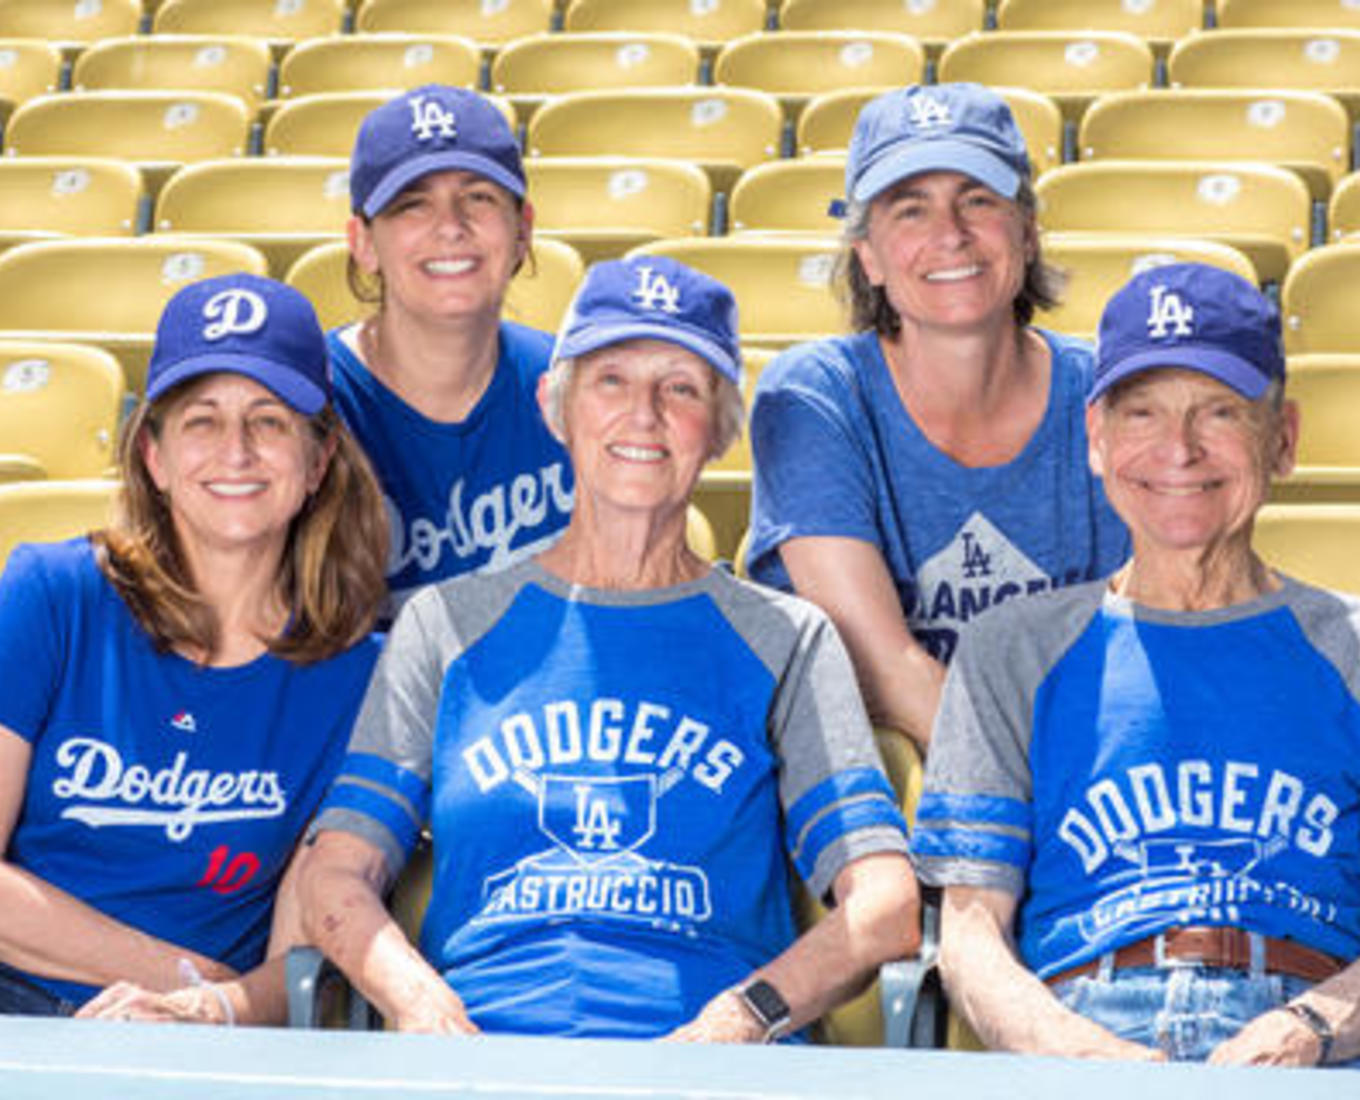 Genny (Castruccio) Salamon ’92 and her family at a Dodgers game